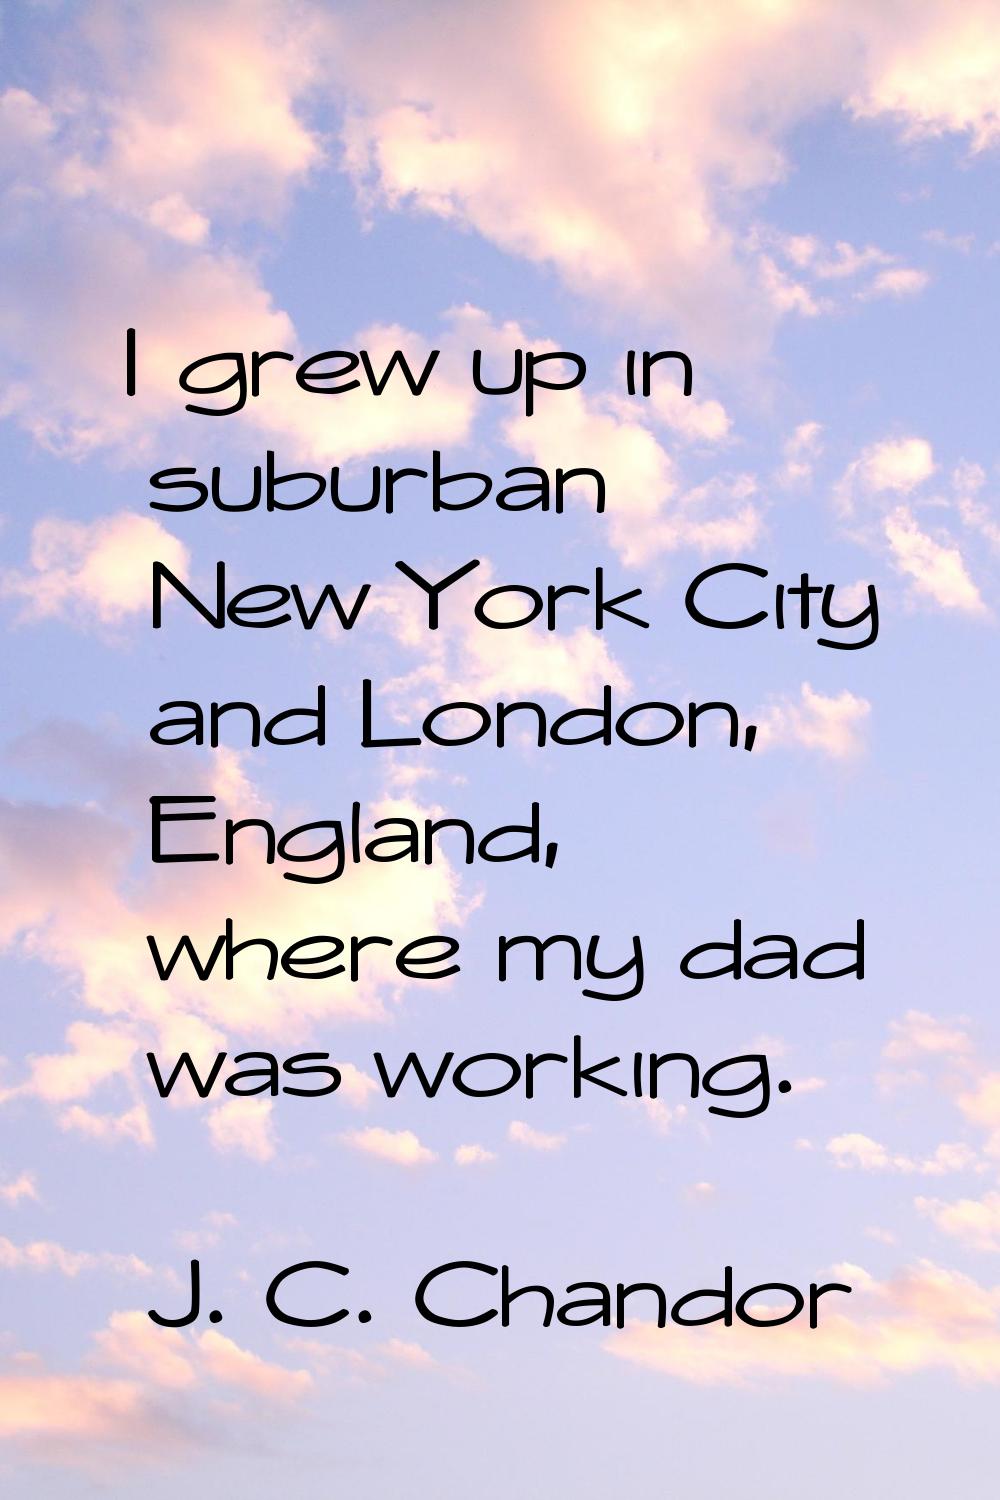 I grew up in suburban New York City and London, England, where my dad was working.